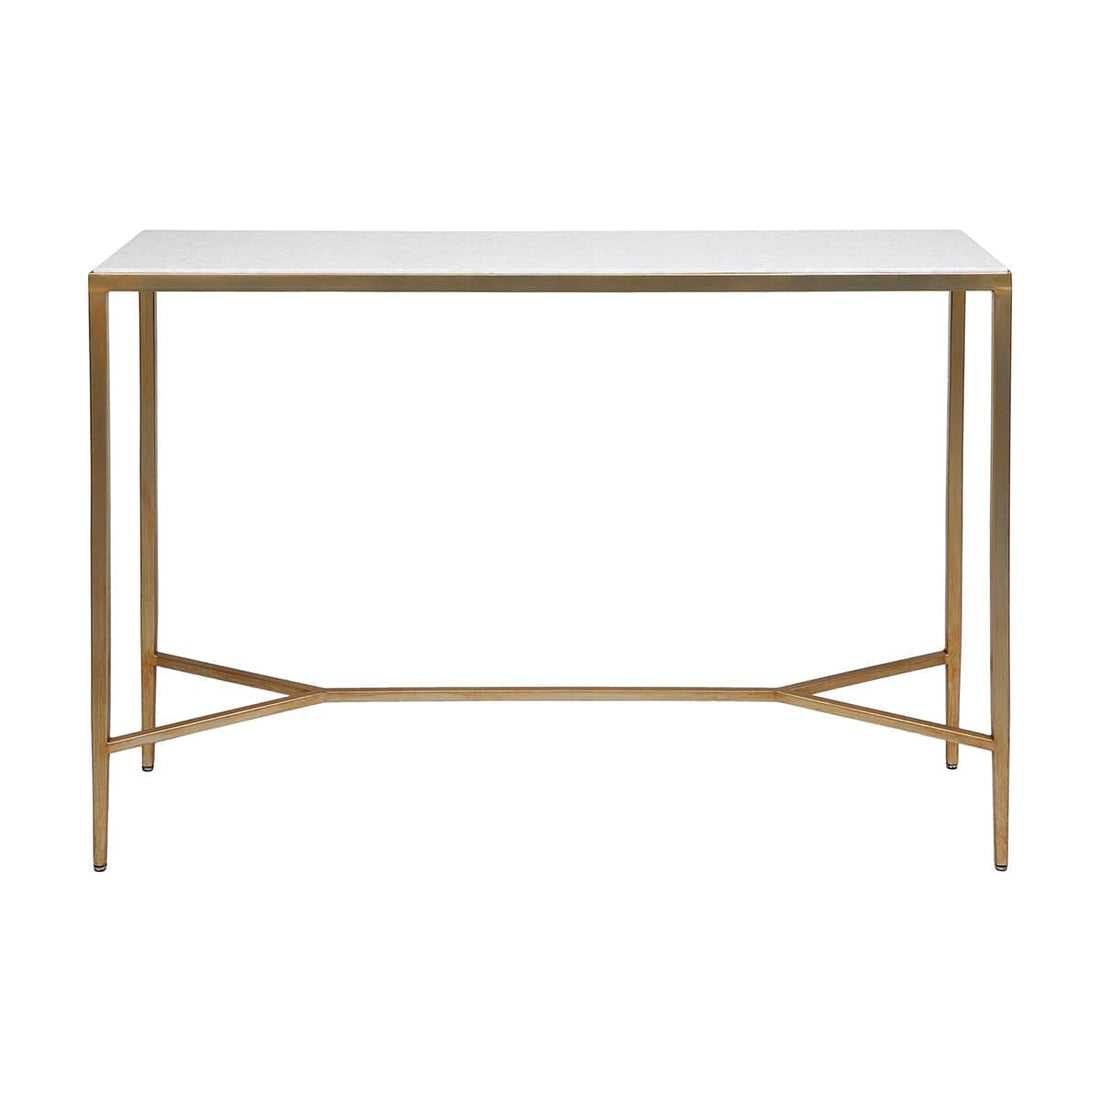 Cafe Lighting & Living Chloe Console Table - Large Gold